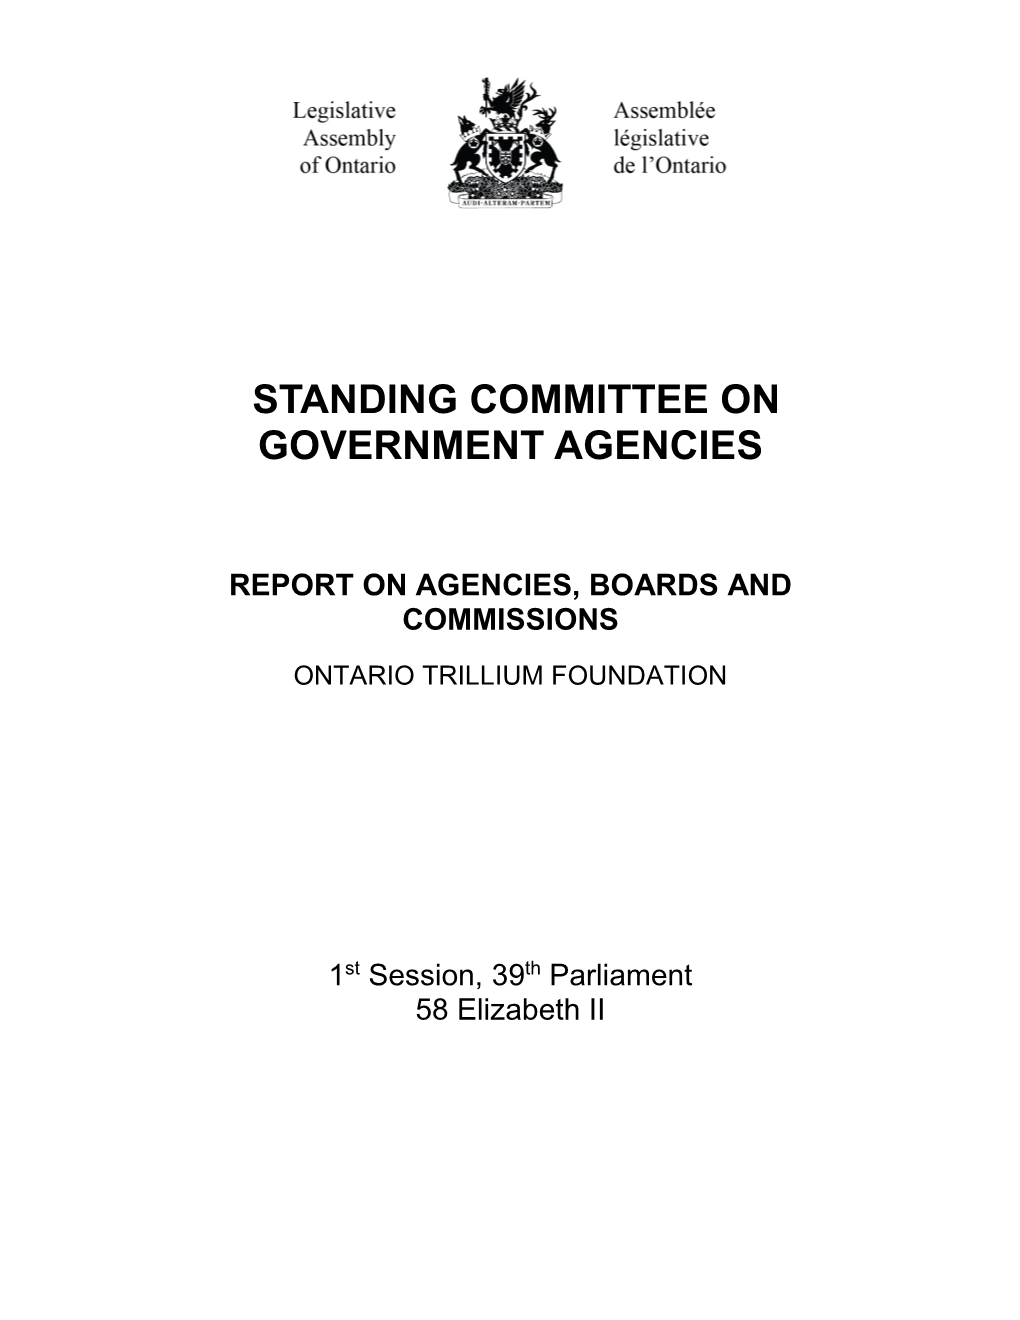 Standing Committee on Government Agencies